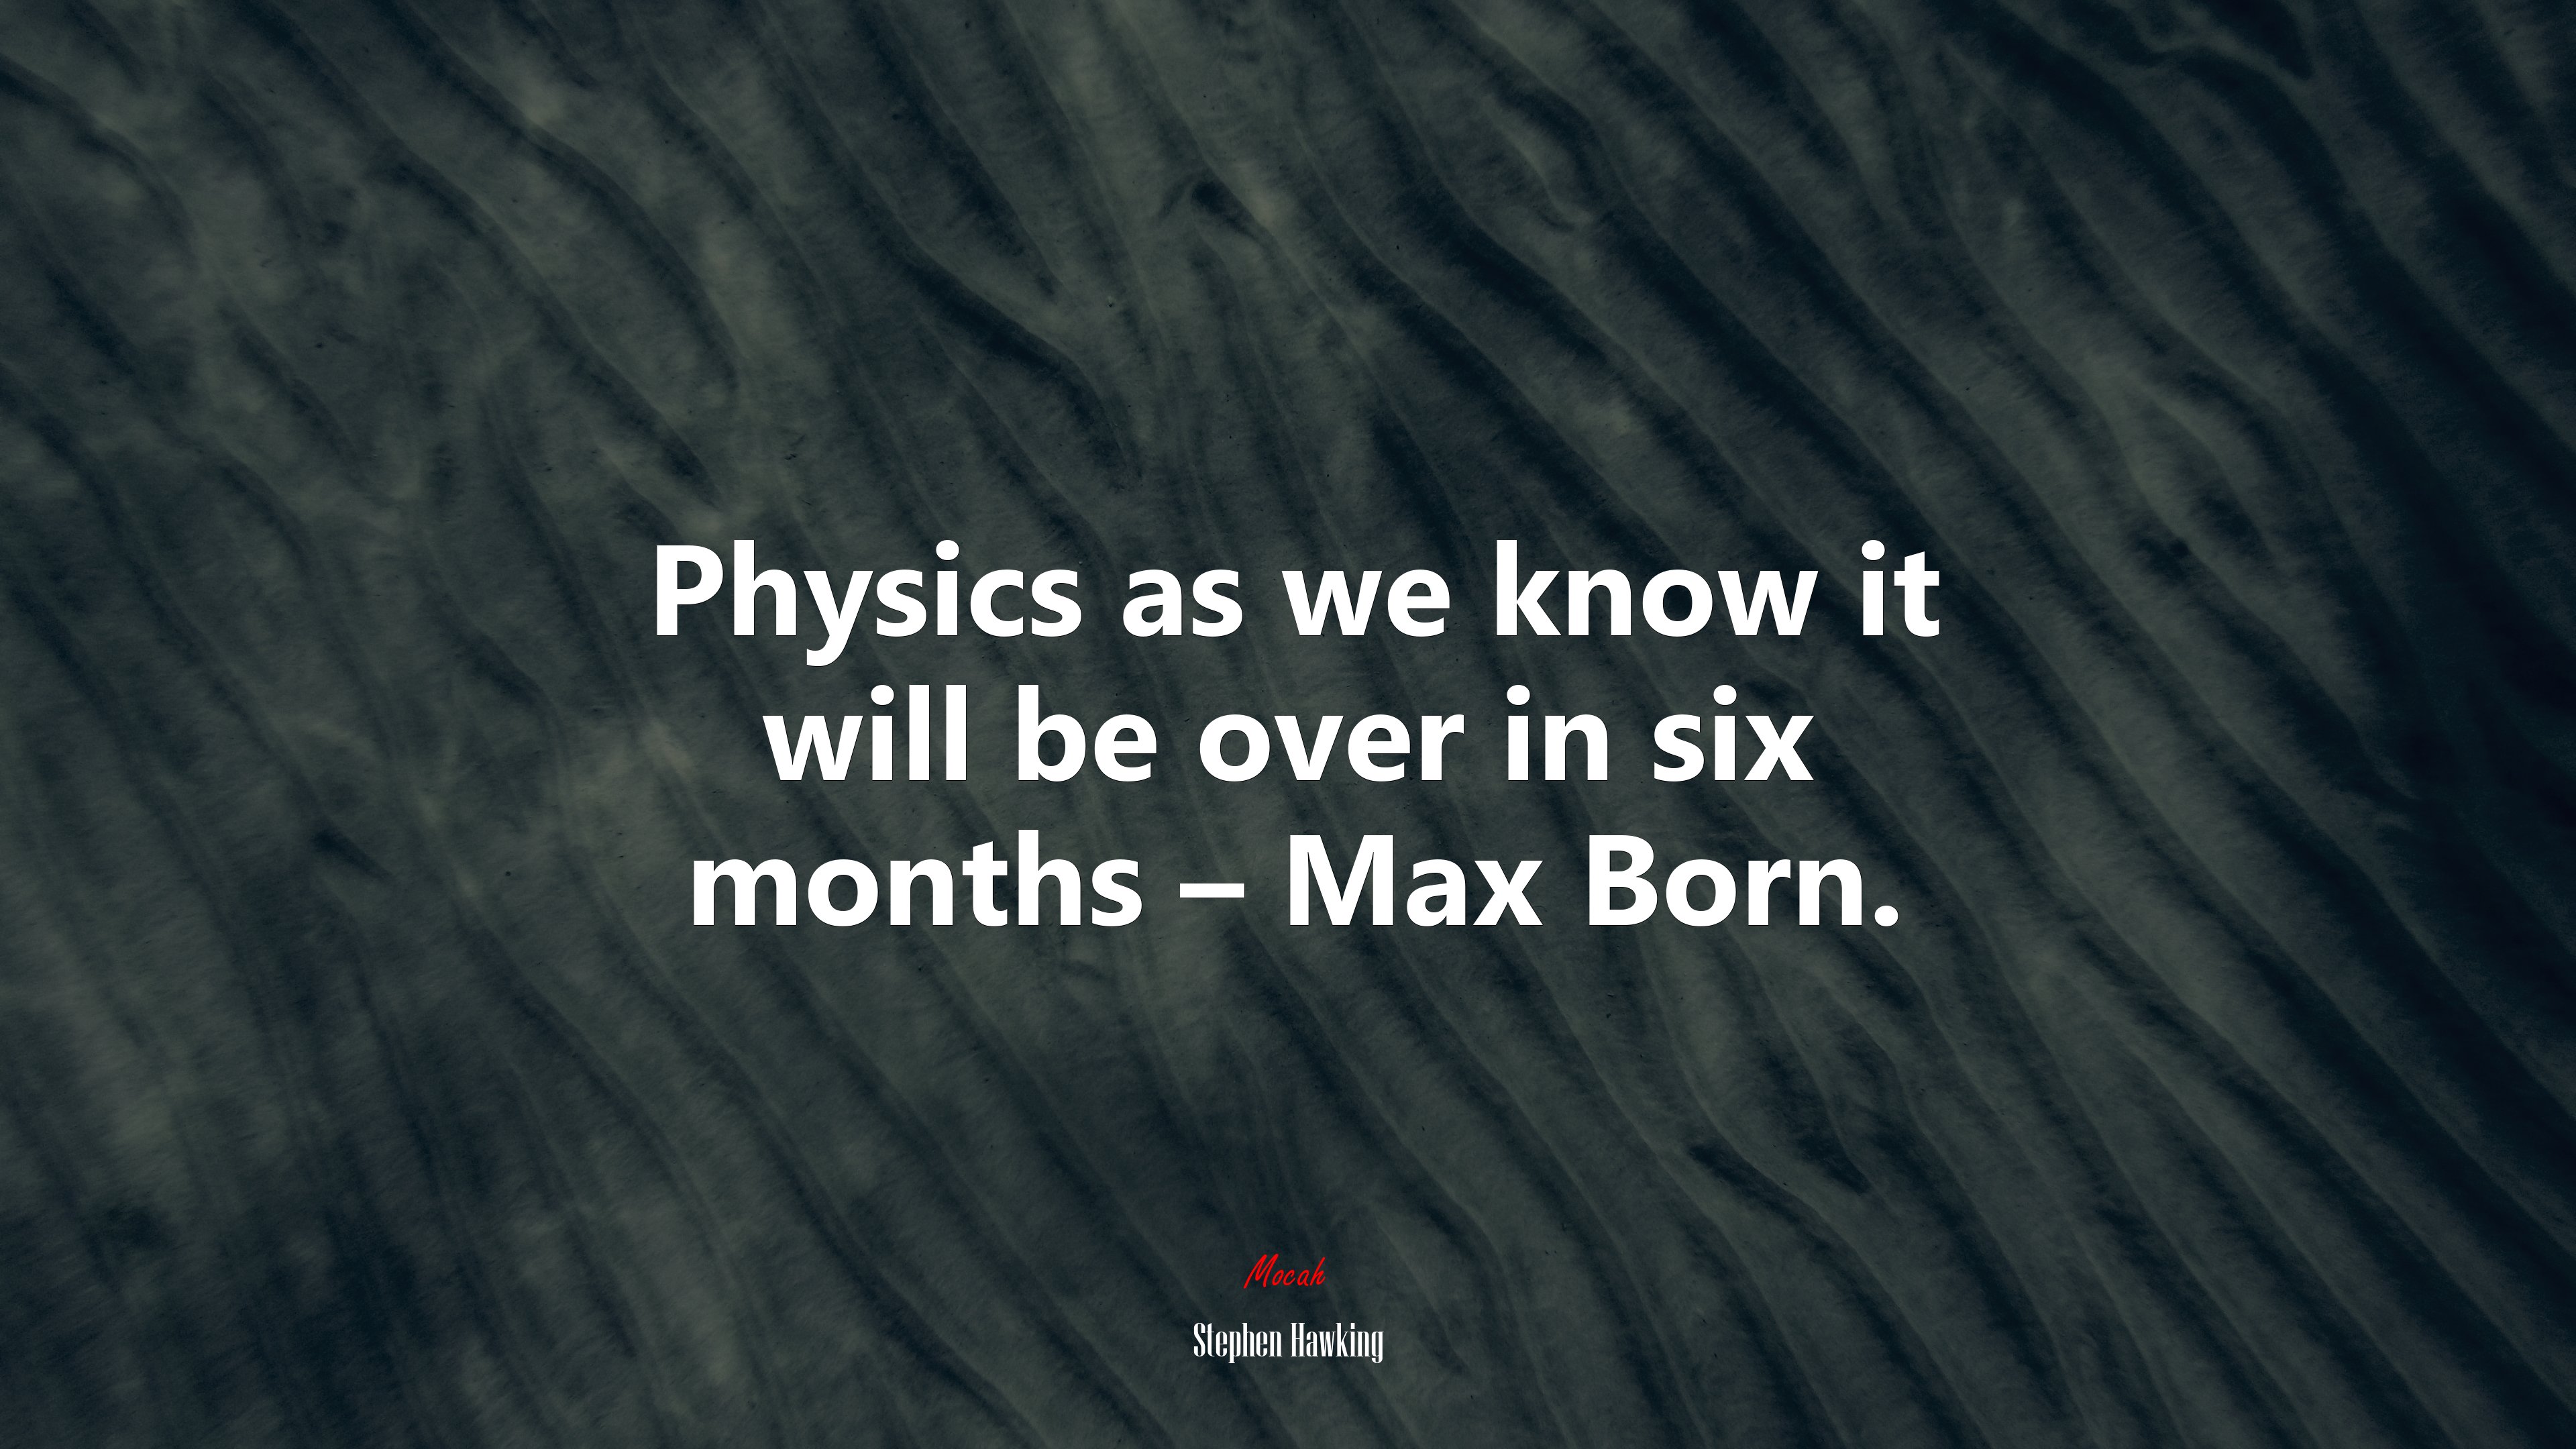 Physics as we know it will be over in six months â max born stephen hawking quote